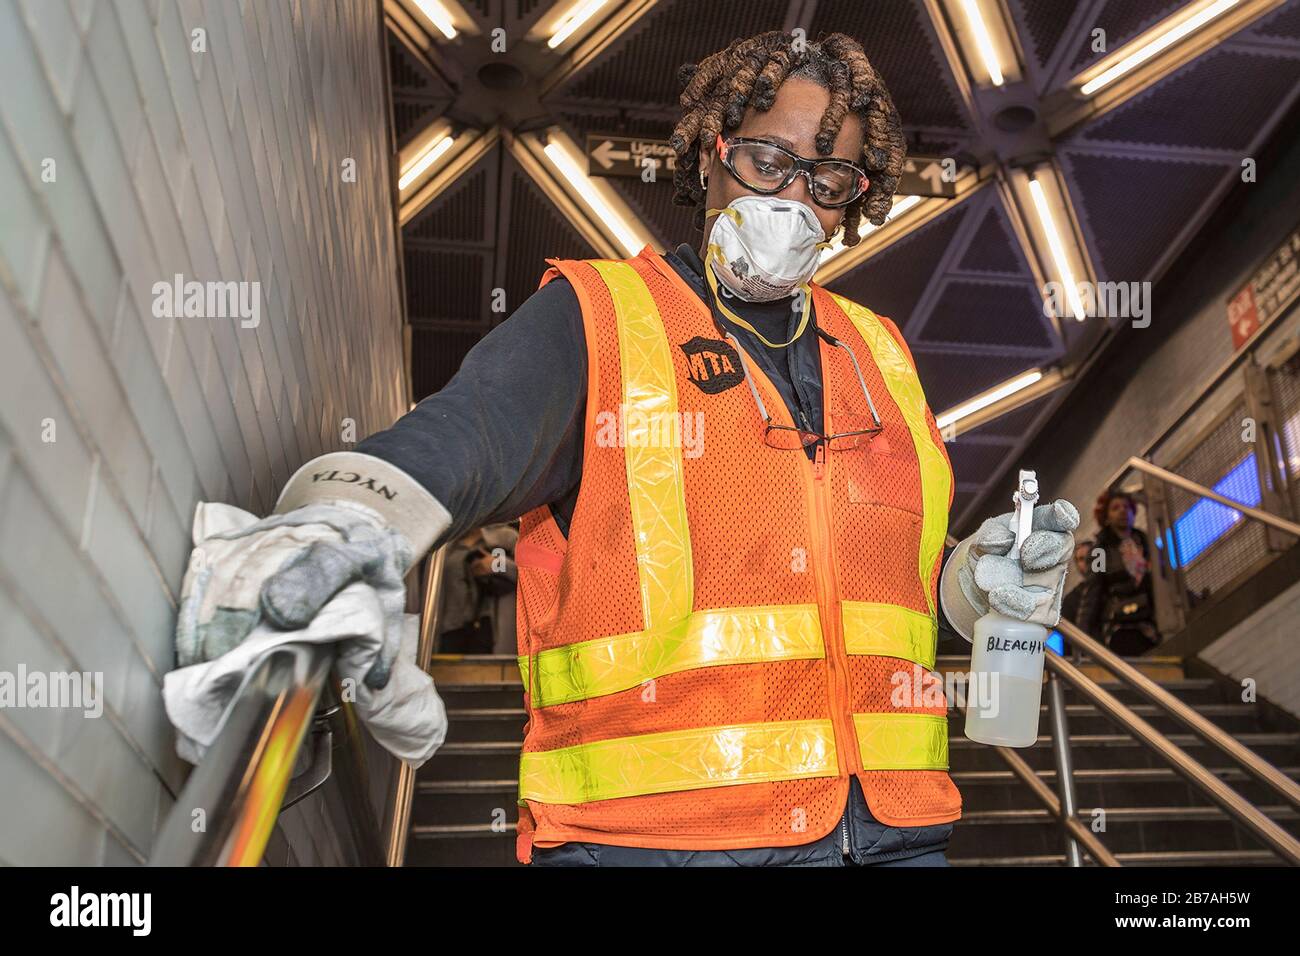 Metropolitan Transportation Authority workers disinfect and sanitizing station handrails to prevent the COVID-19, coronavirus in the New York City Transit subway system March 12, 2020 in New York City, New York. Stock Photo